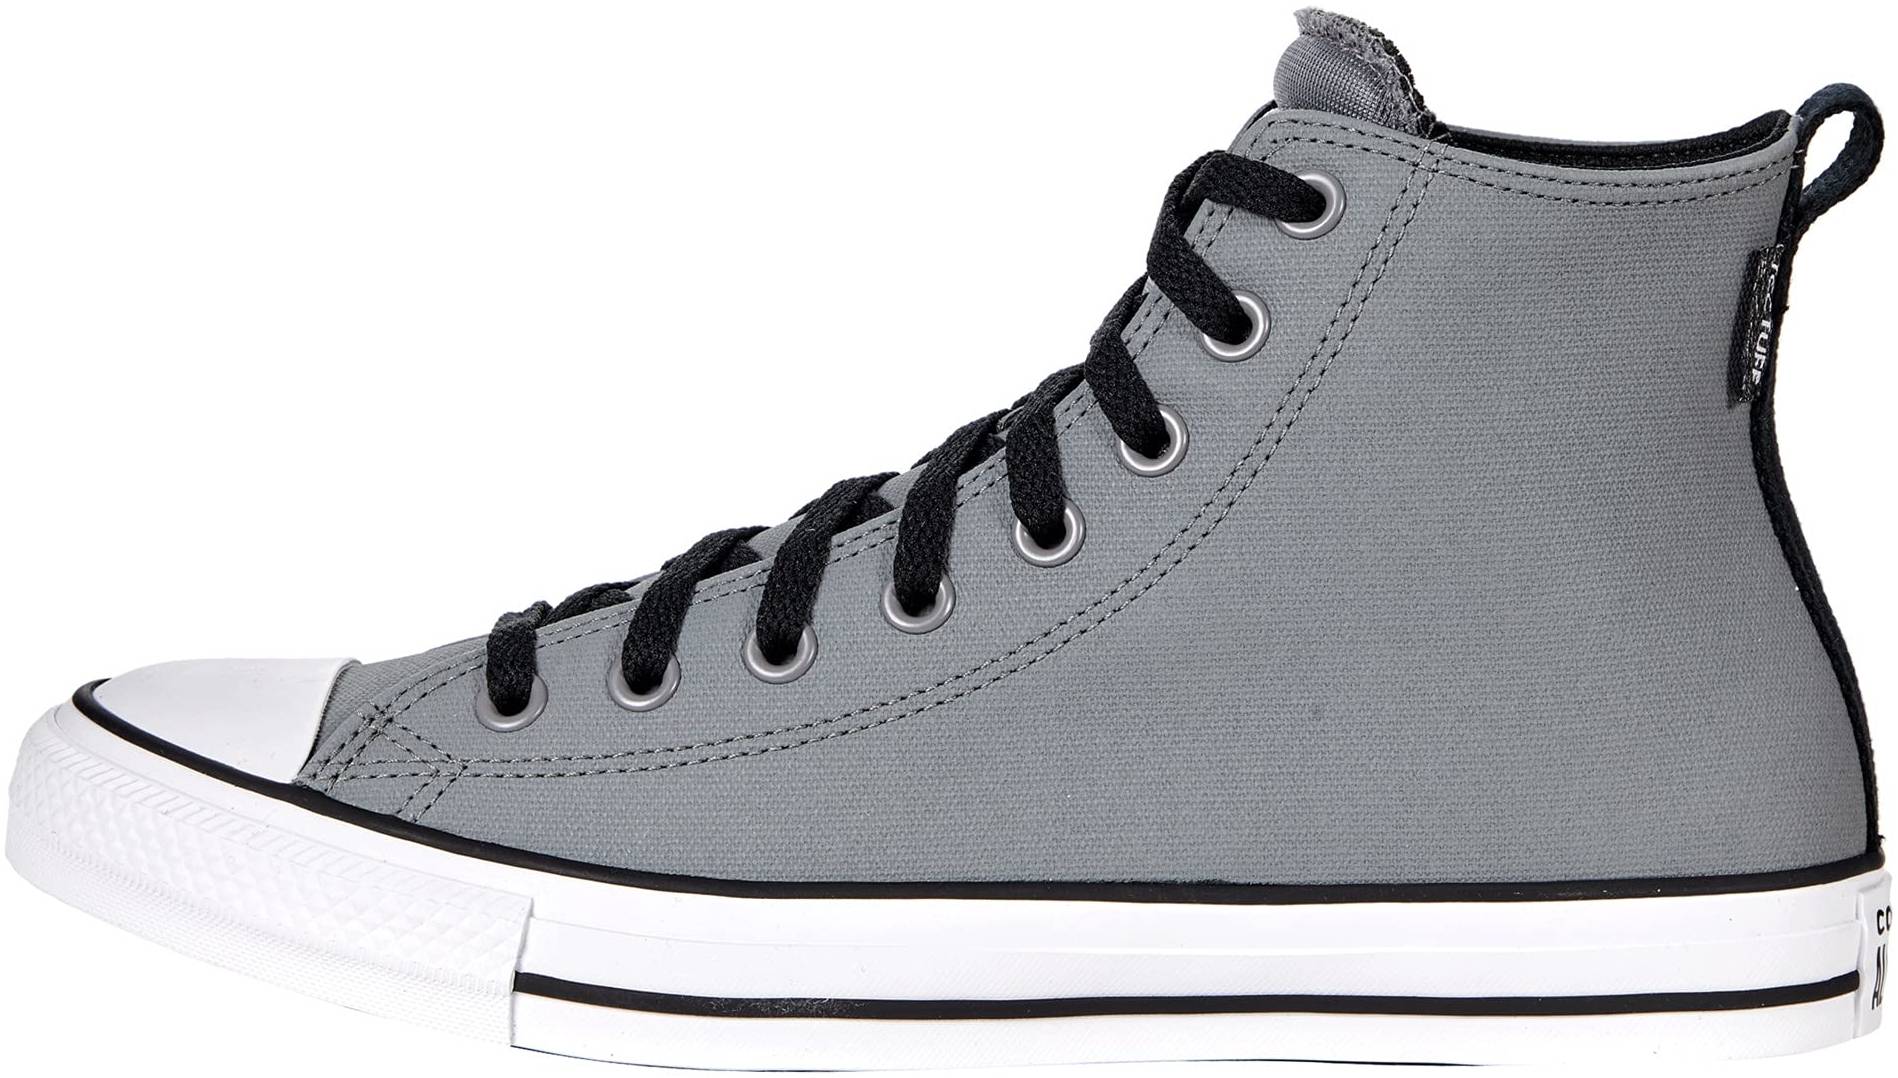 Immorality squeeze pump 10+ Grey Converse sneakers: Save up to 21% | RunRepeat